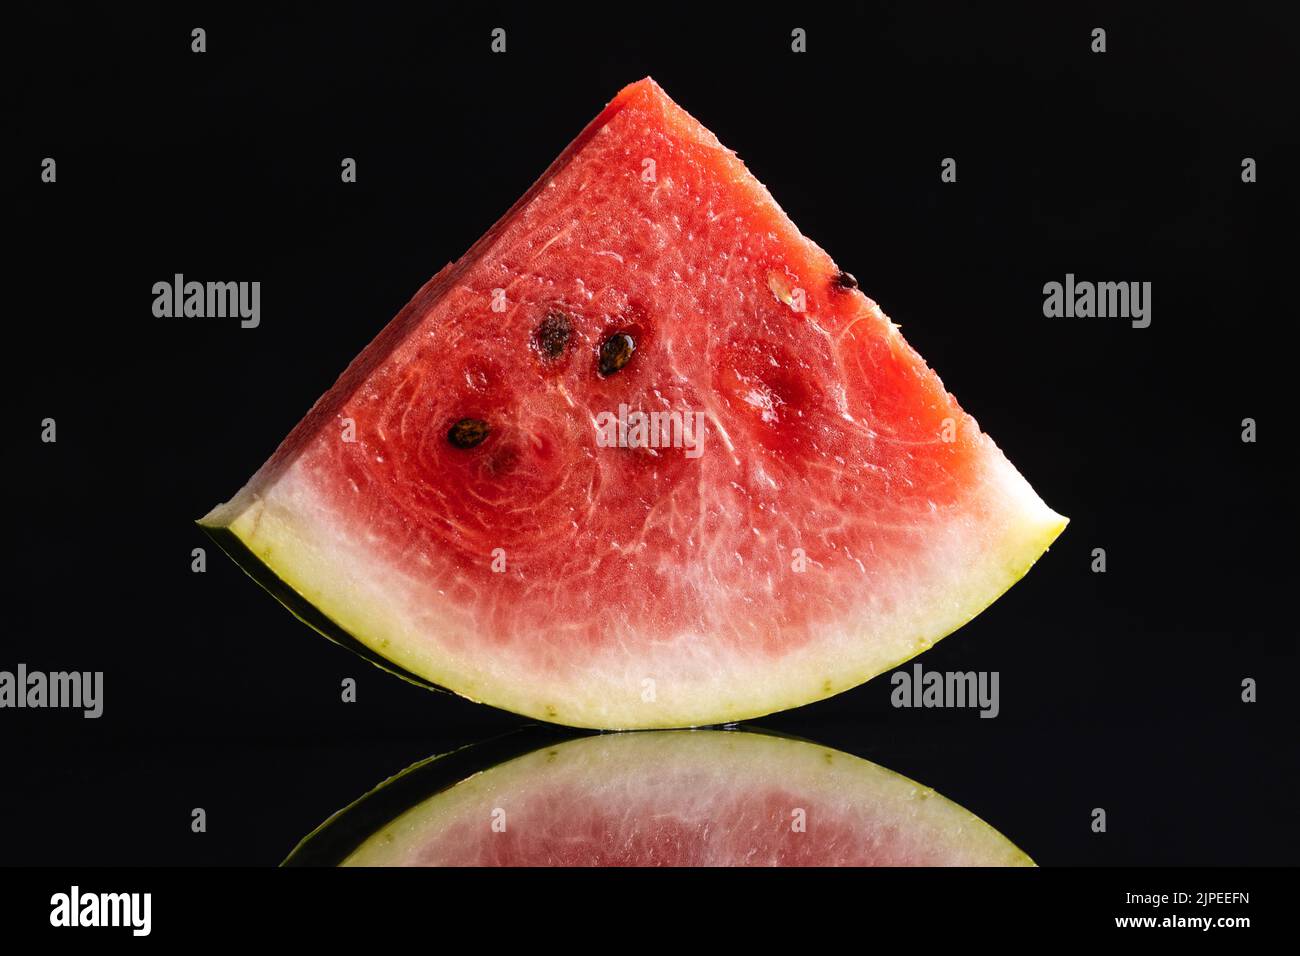 Slices of red watermelon on a black background. Stock Photo